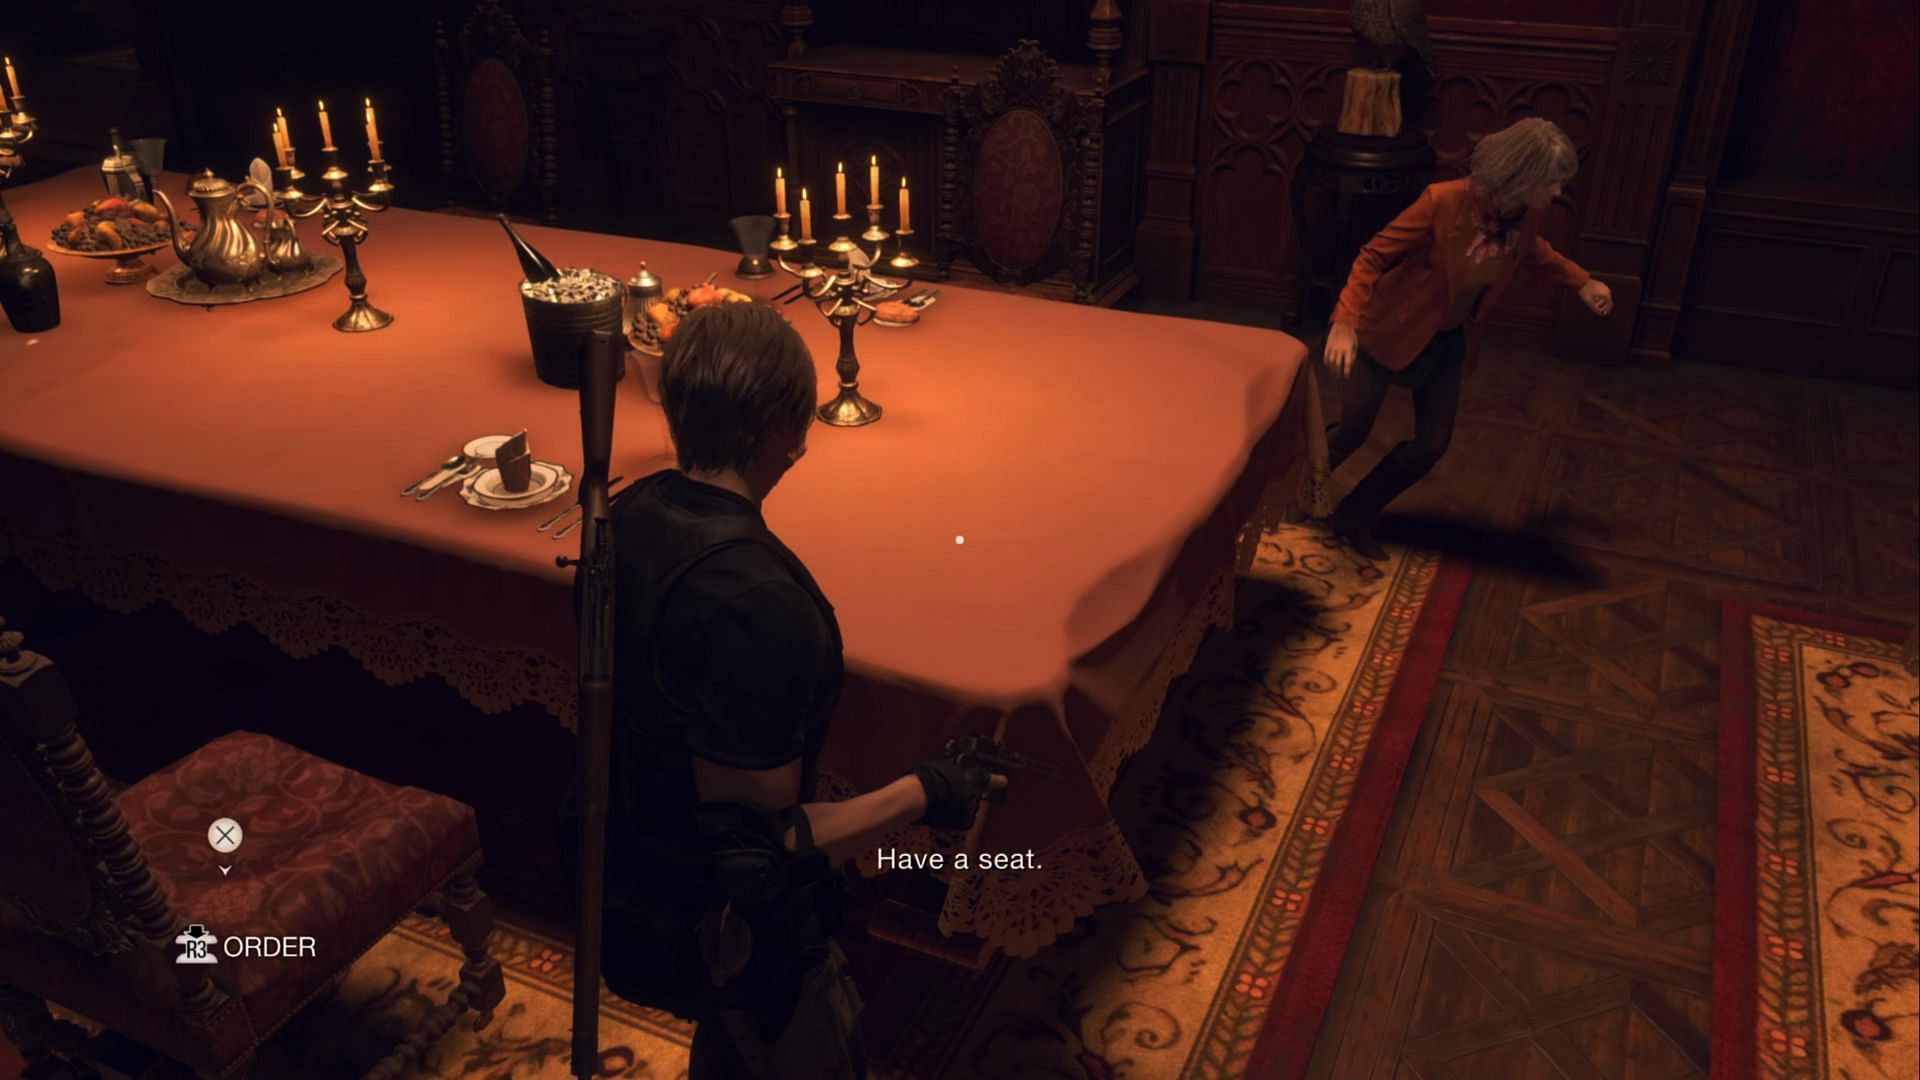 Resident Evil 4 Dining Hall bell puzzle solution, how to get